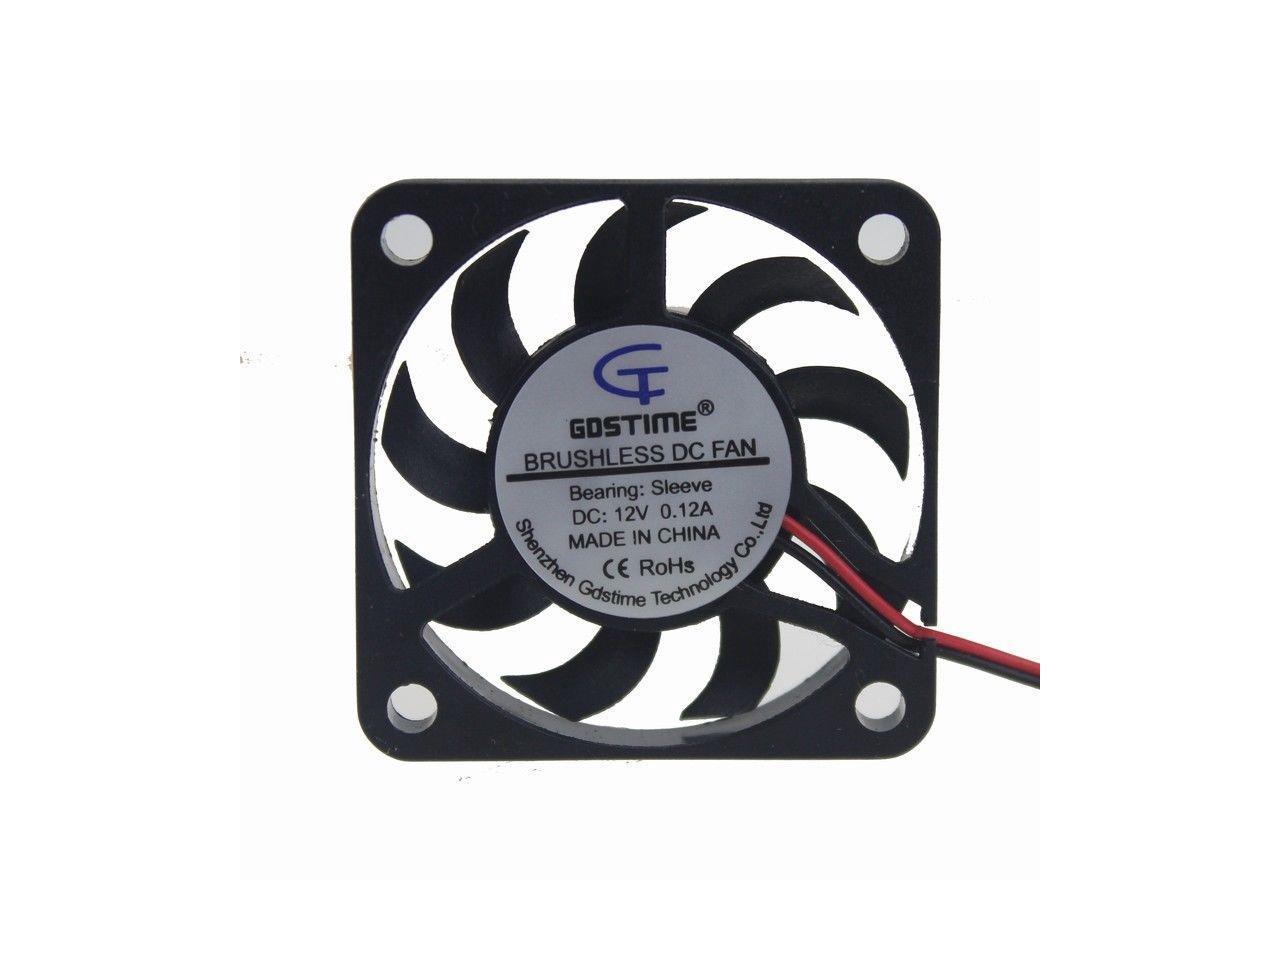 50x50x10mm 12V Brushless PC CPU Case Cooling Cooler Fan 2pin ph2.0 9blades